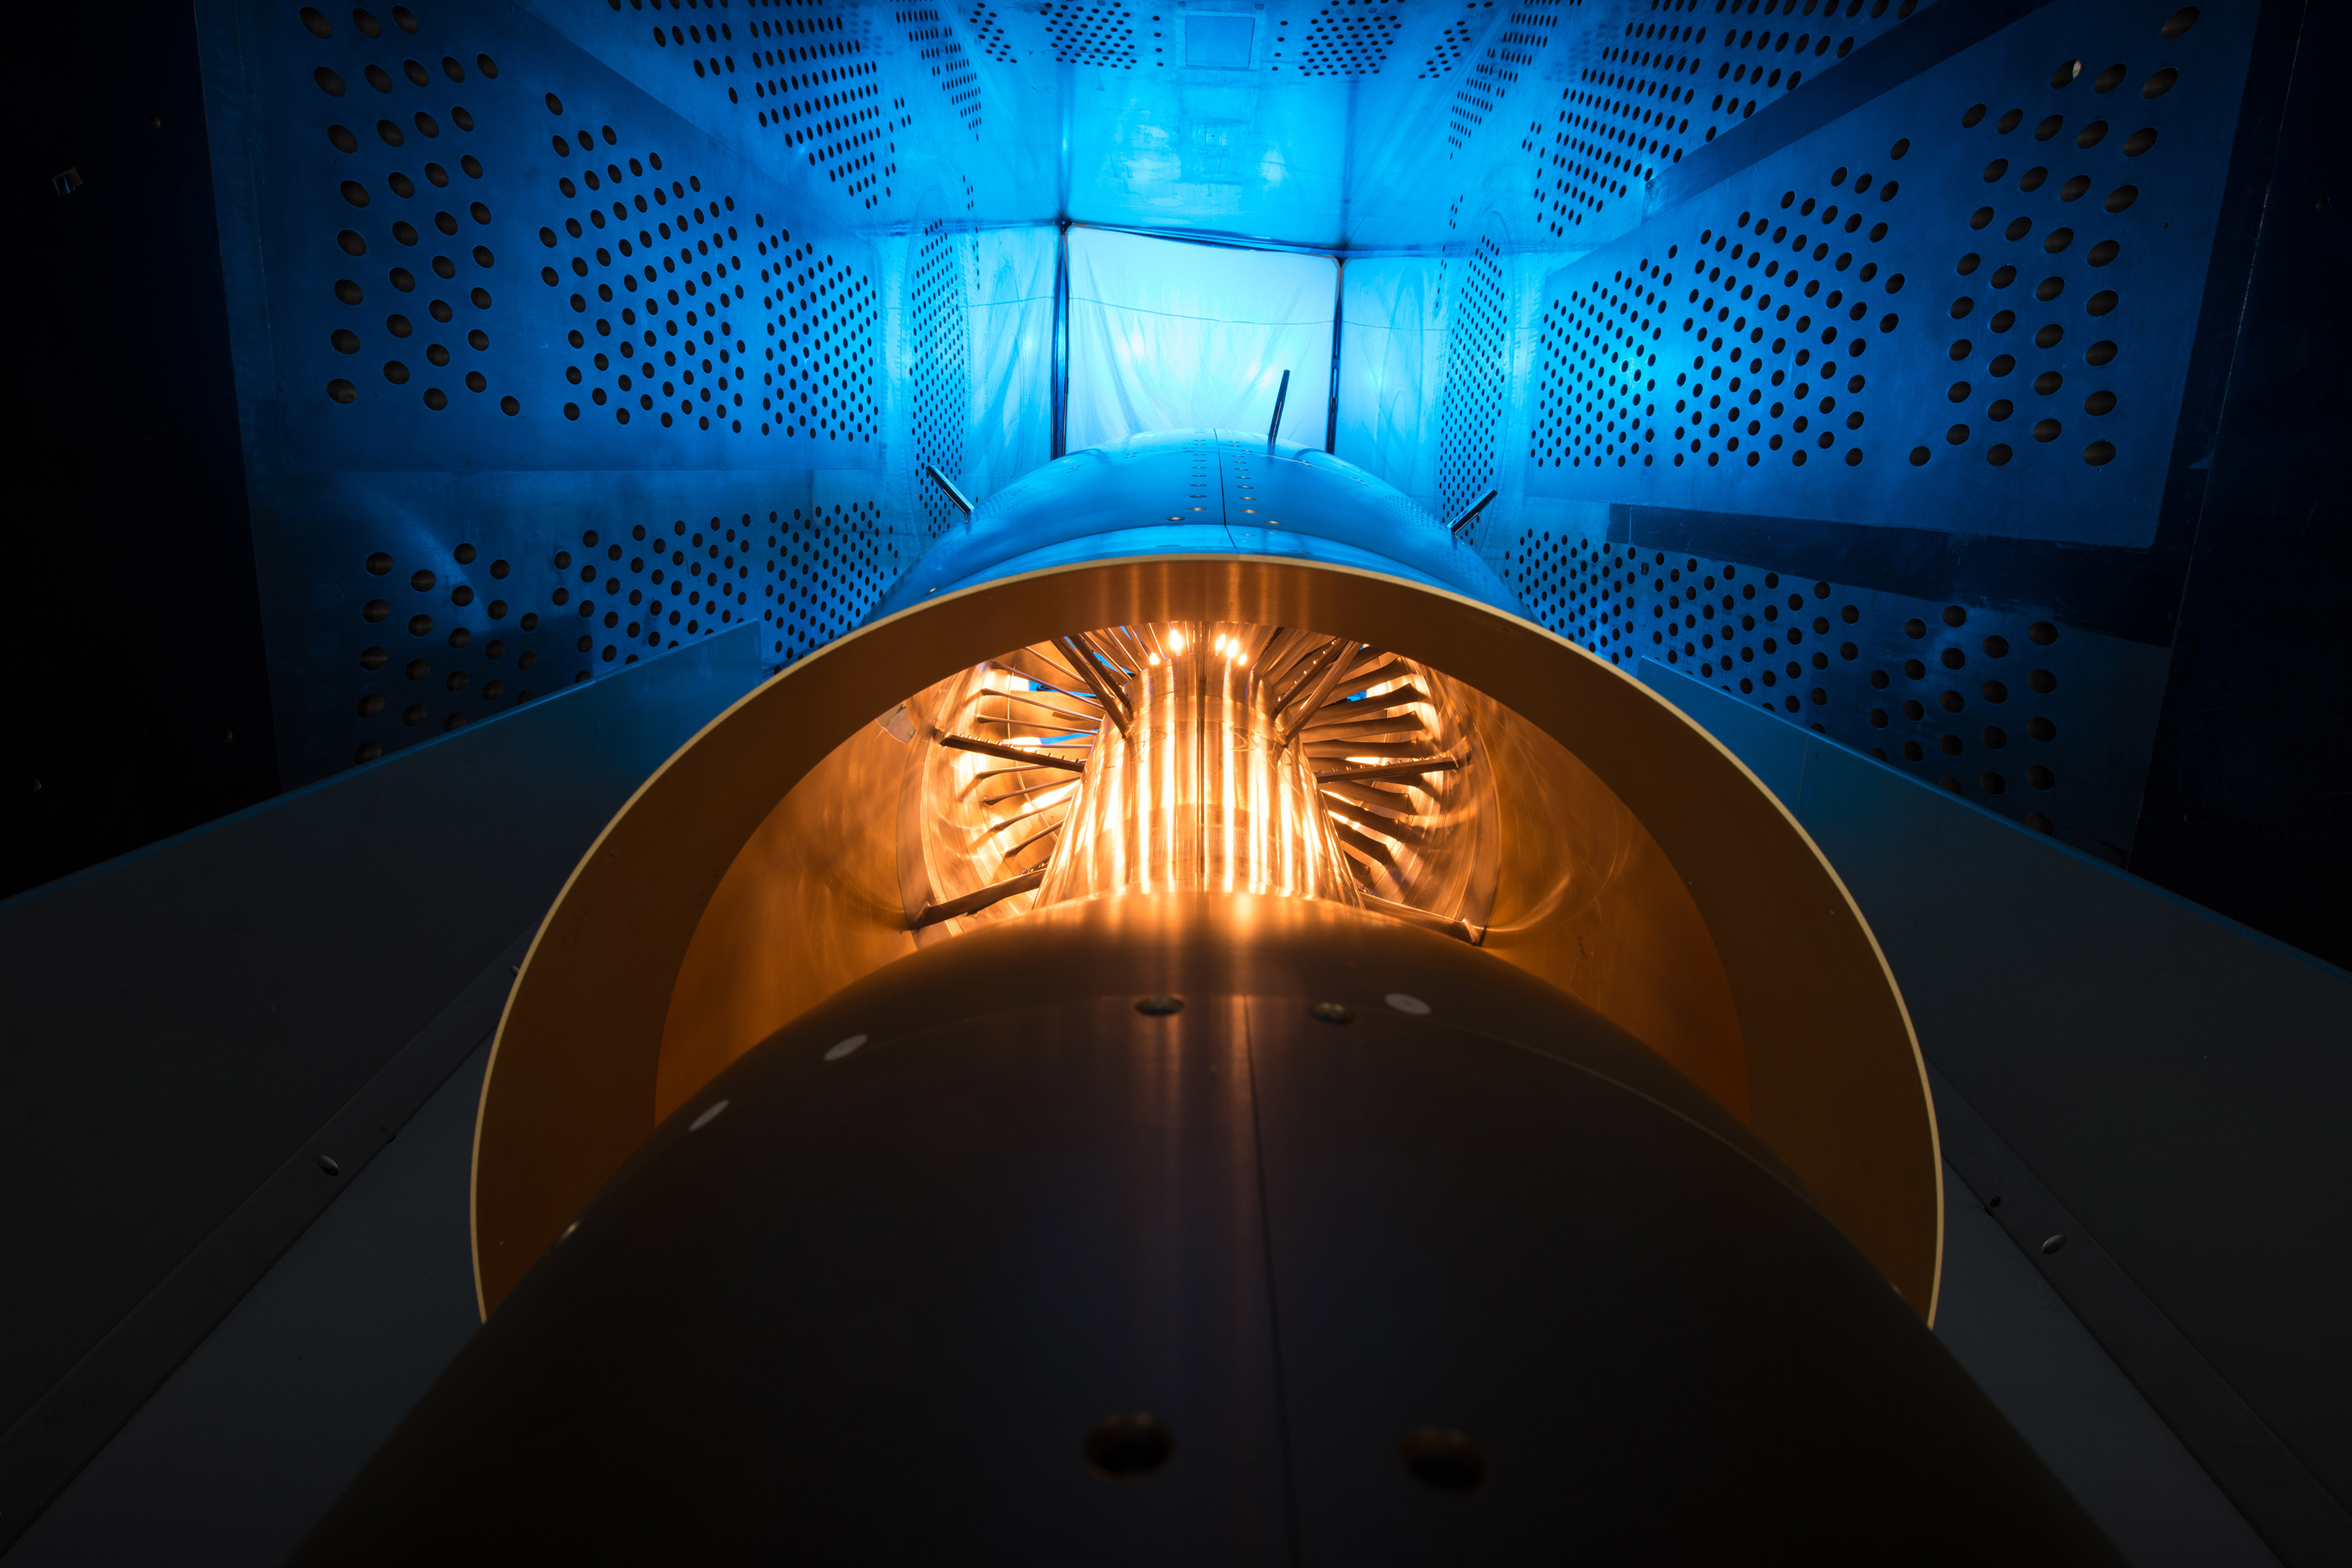 Inside the 8' x 6' wind tunnel at NASA Glenn, engineers recently tested a fan and inlet design, commonly called a propulsor, which could use four to eight percent less fuel than today's advanced aircraft.